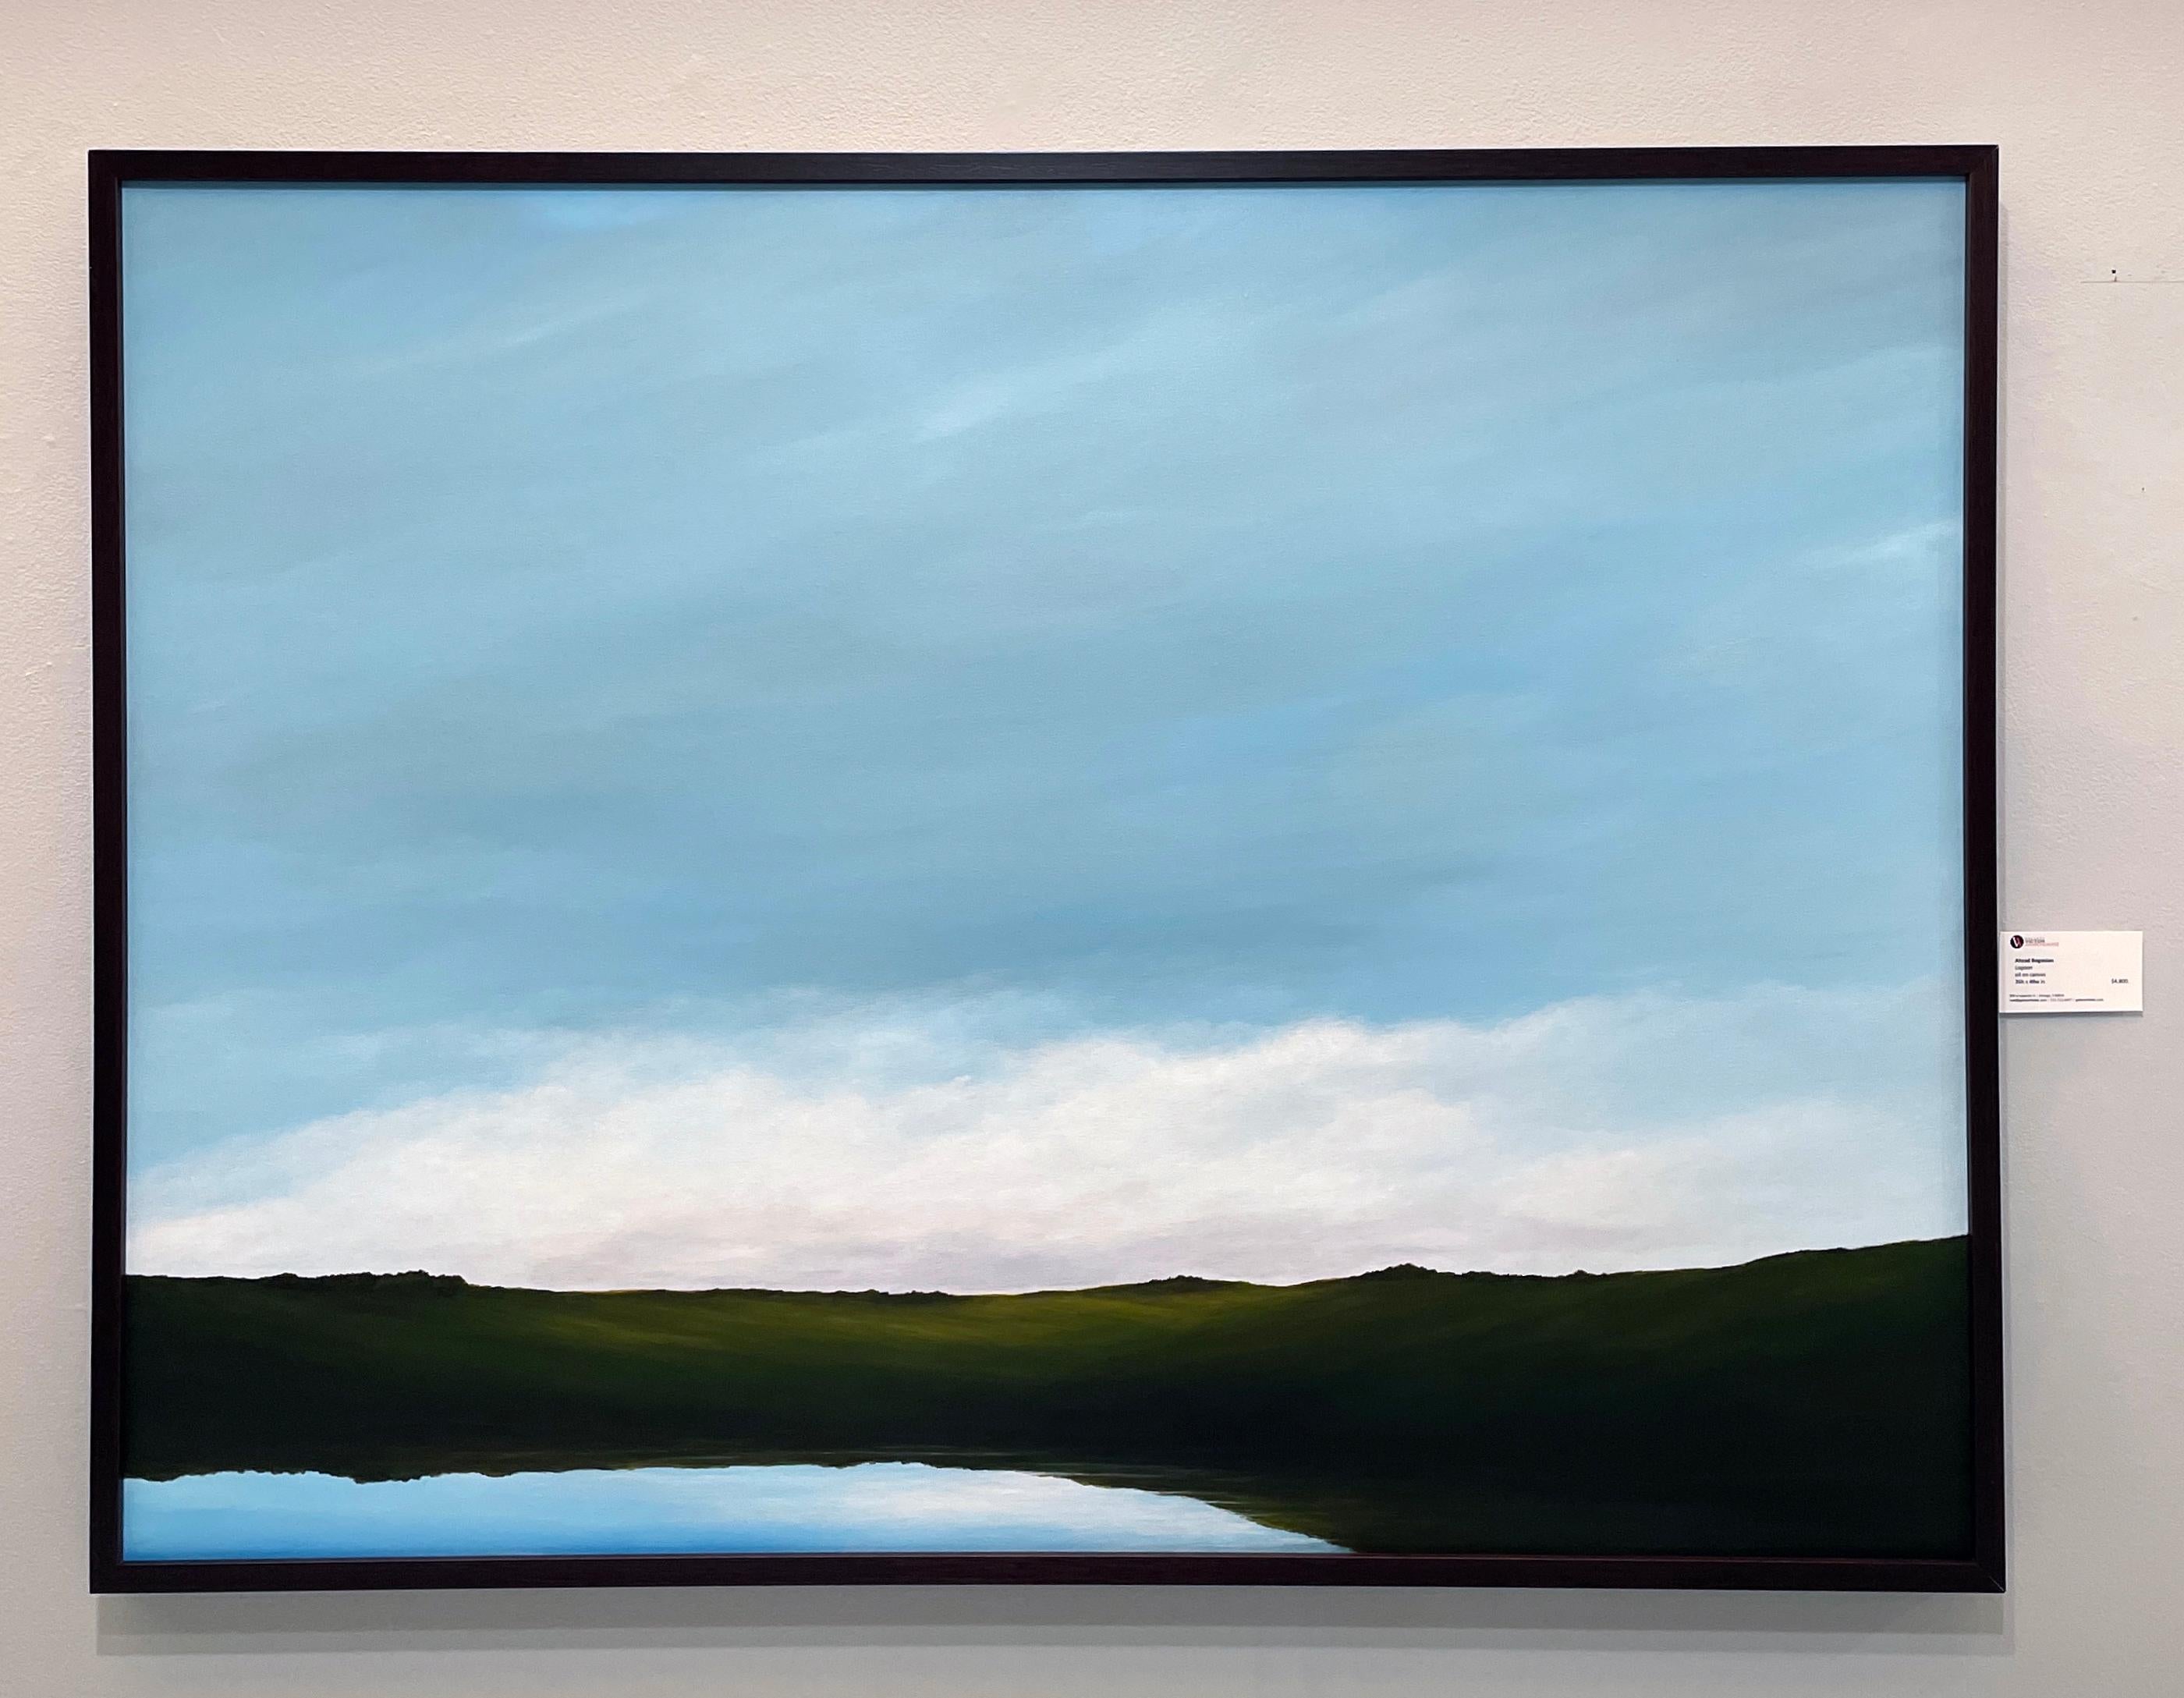 Lagoon - Serene Landscape, Expansive Cloudy Sky with Calm Lake, Original Oil  - Painting by Ahzad Bogosian